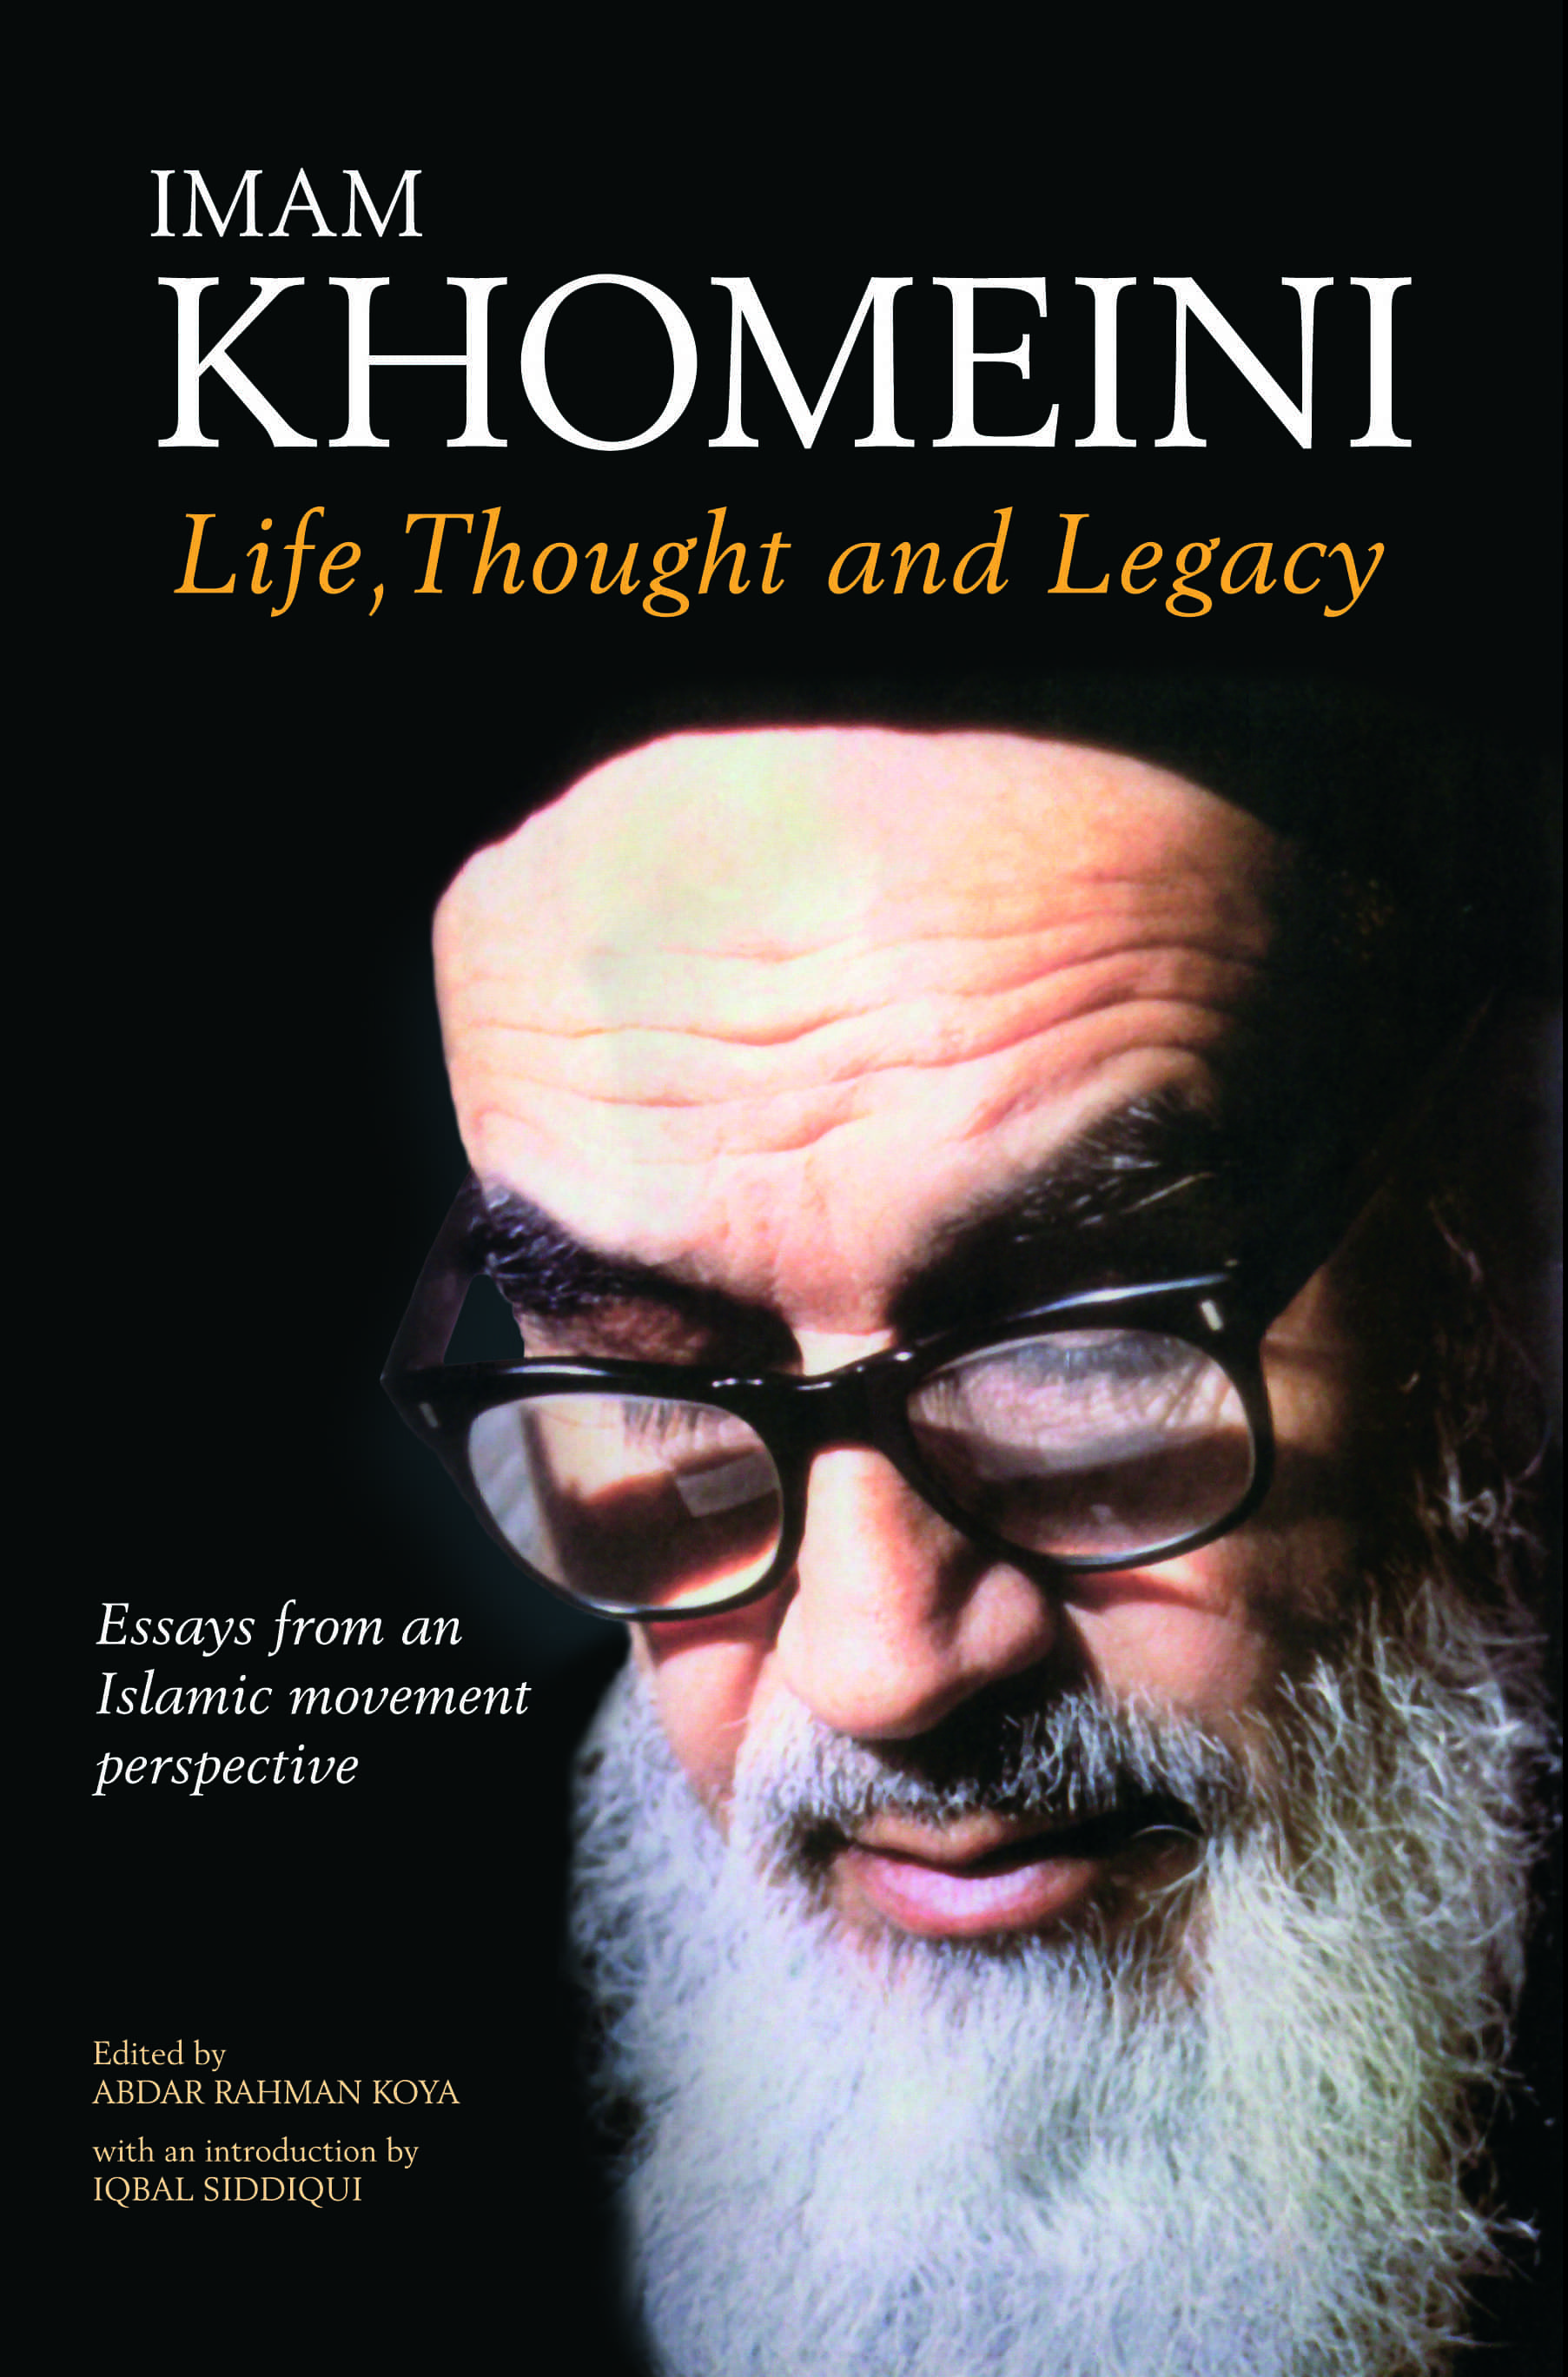 Imam Khomeini: Life, Thought and Legacy